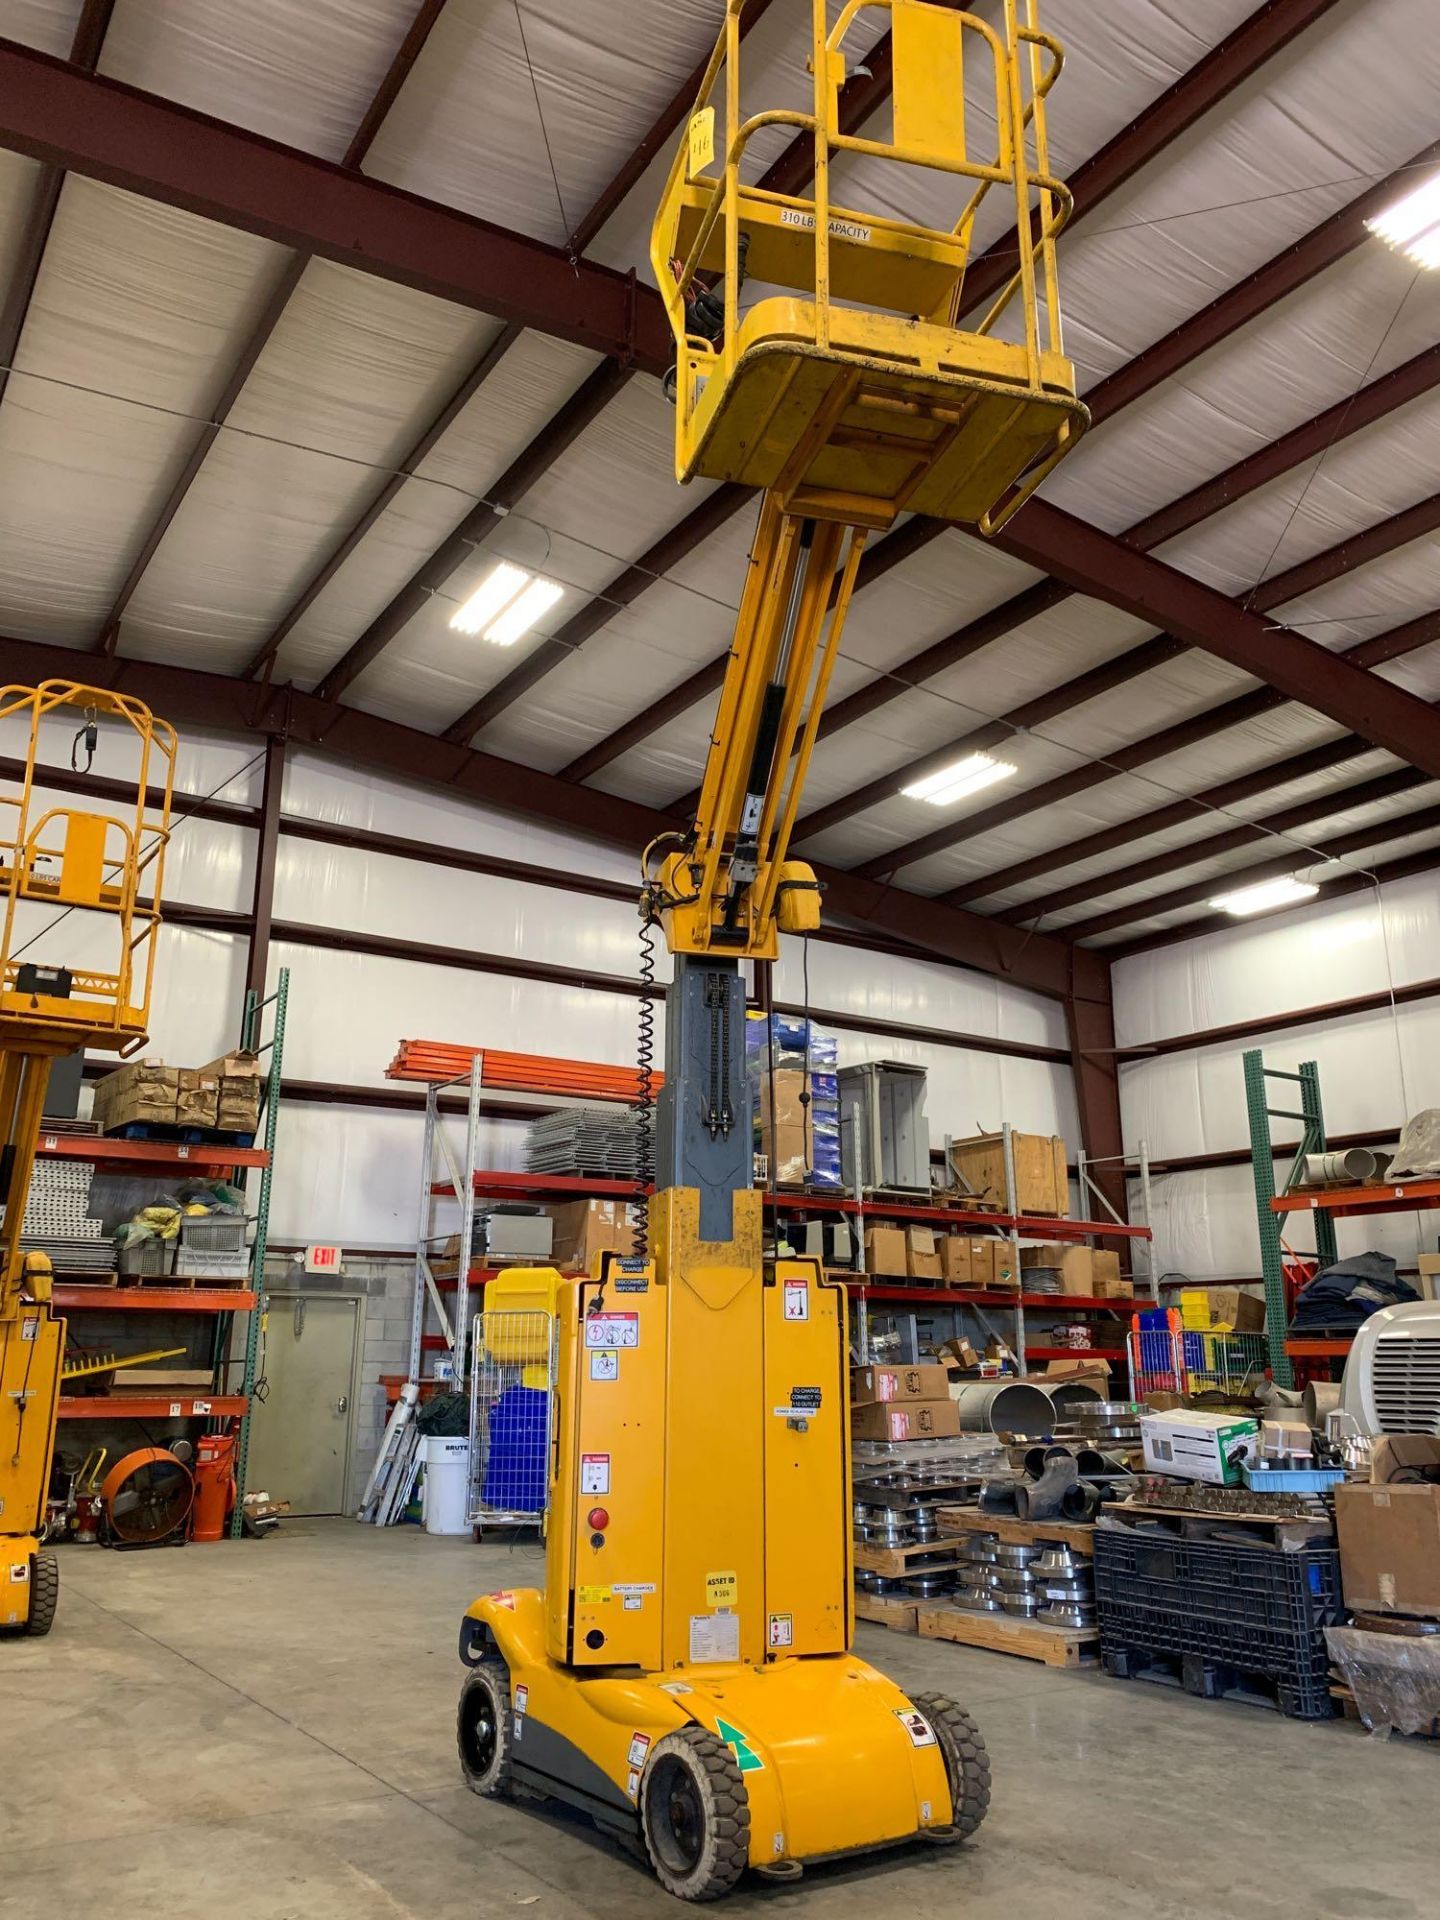 HOULOTTE STAR 22J ELECTRIC MAN LIFT, 22' HEIGHT CAPACITY - Image 7 of 10